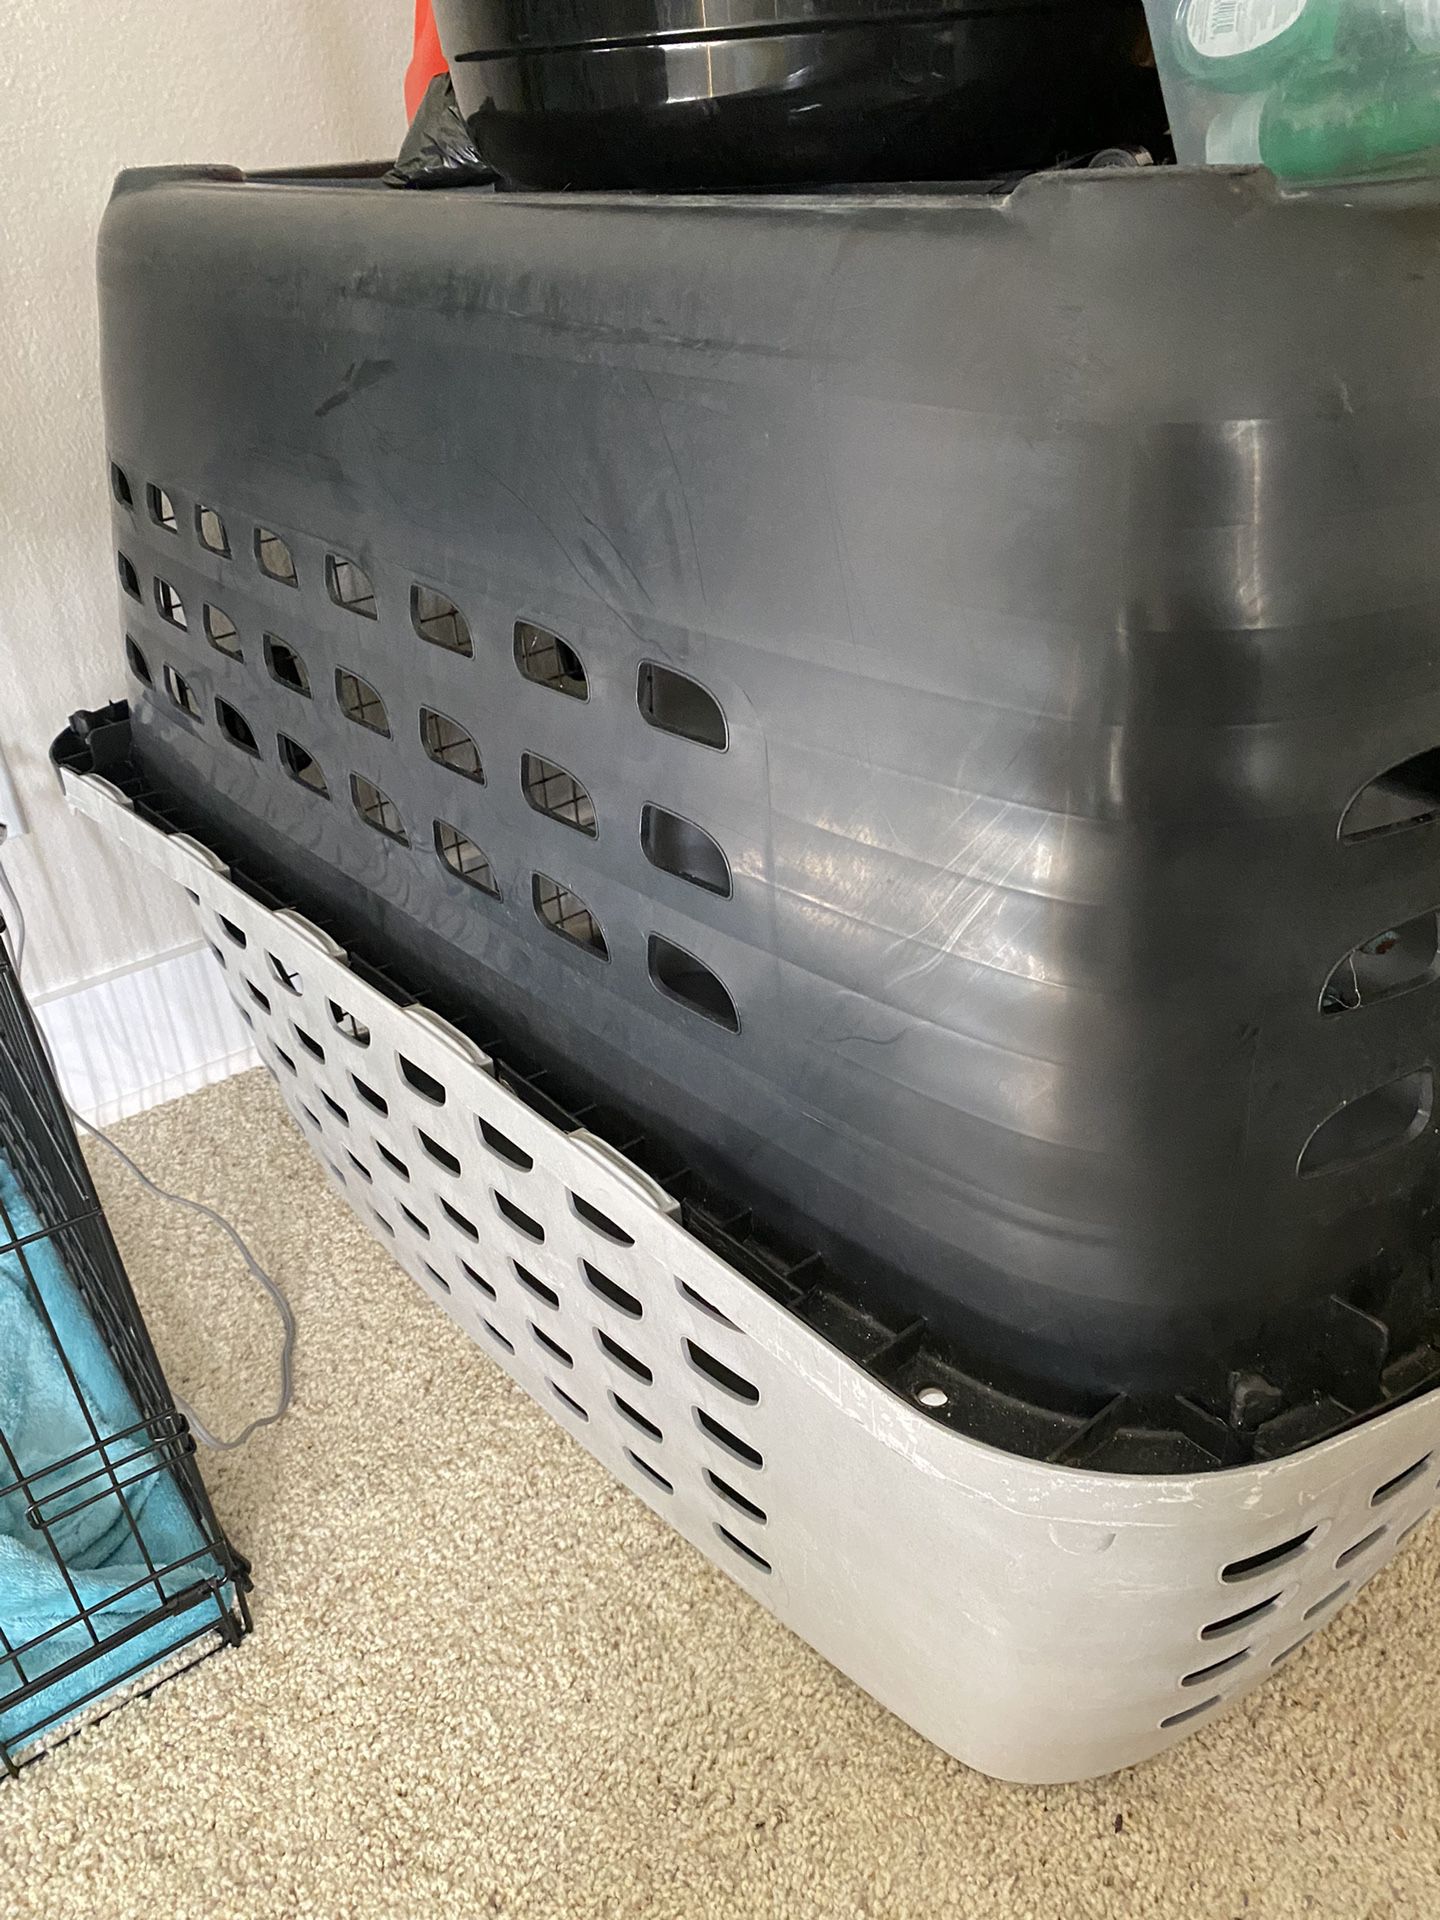 Gently used dog crate